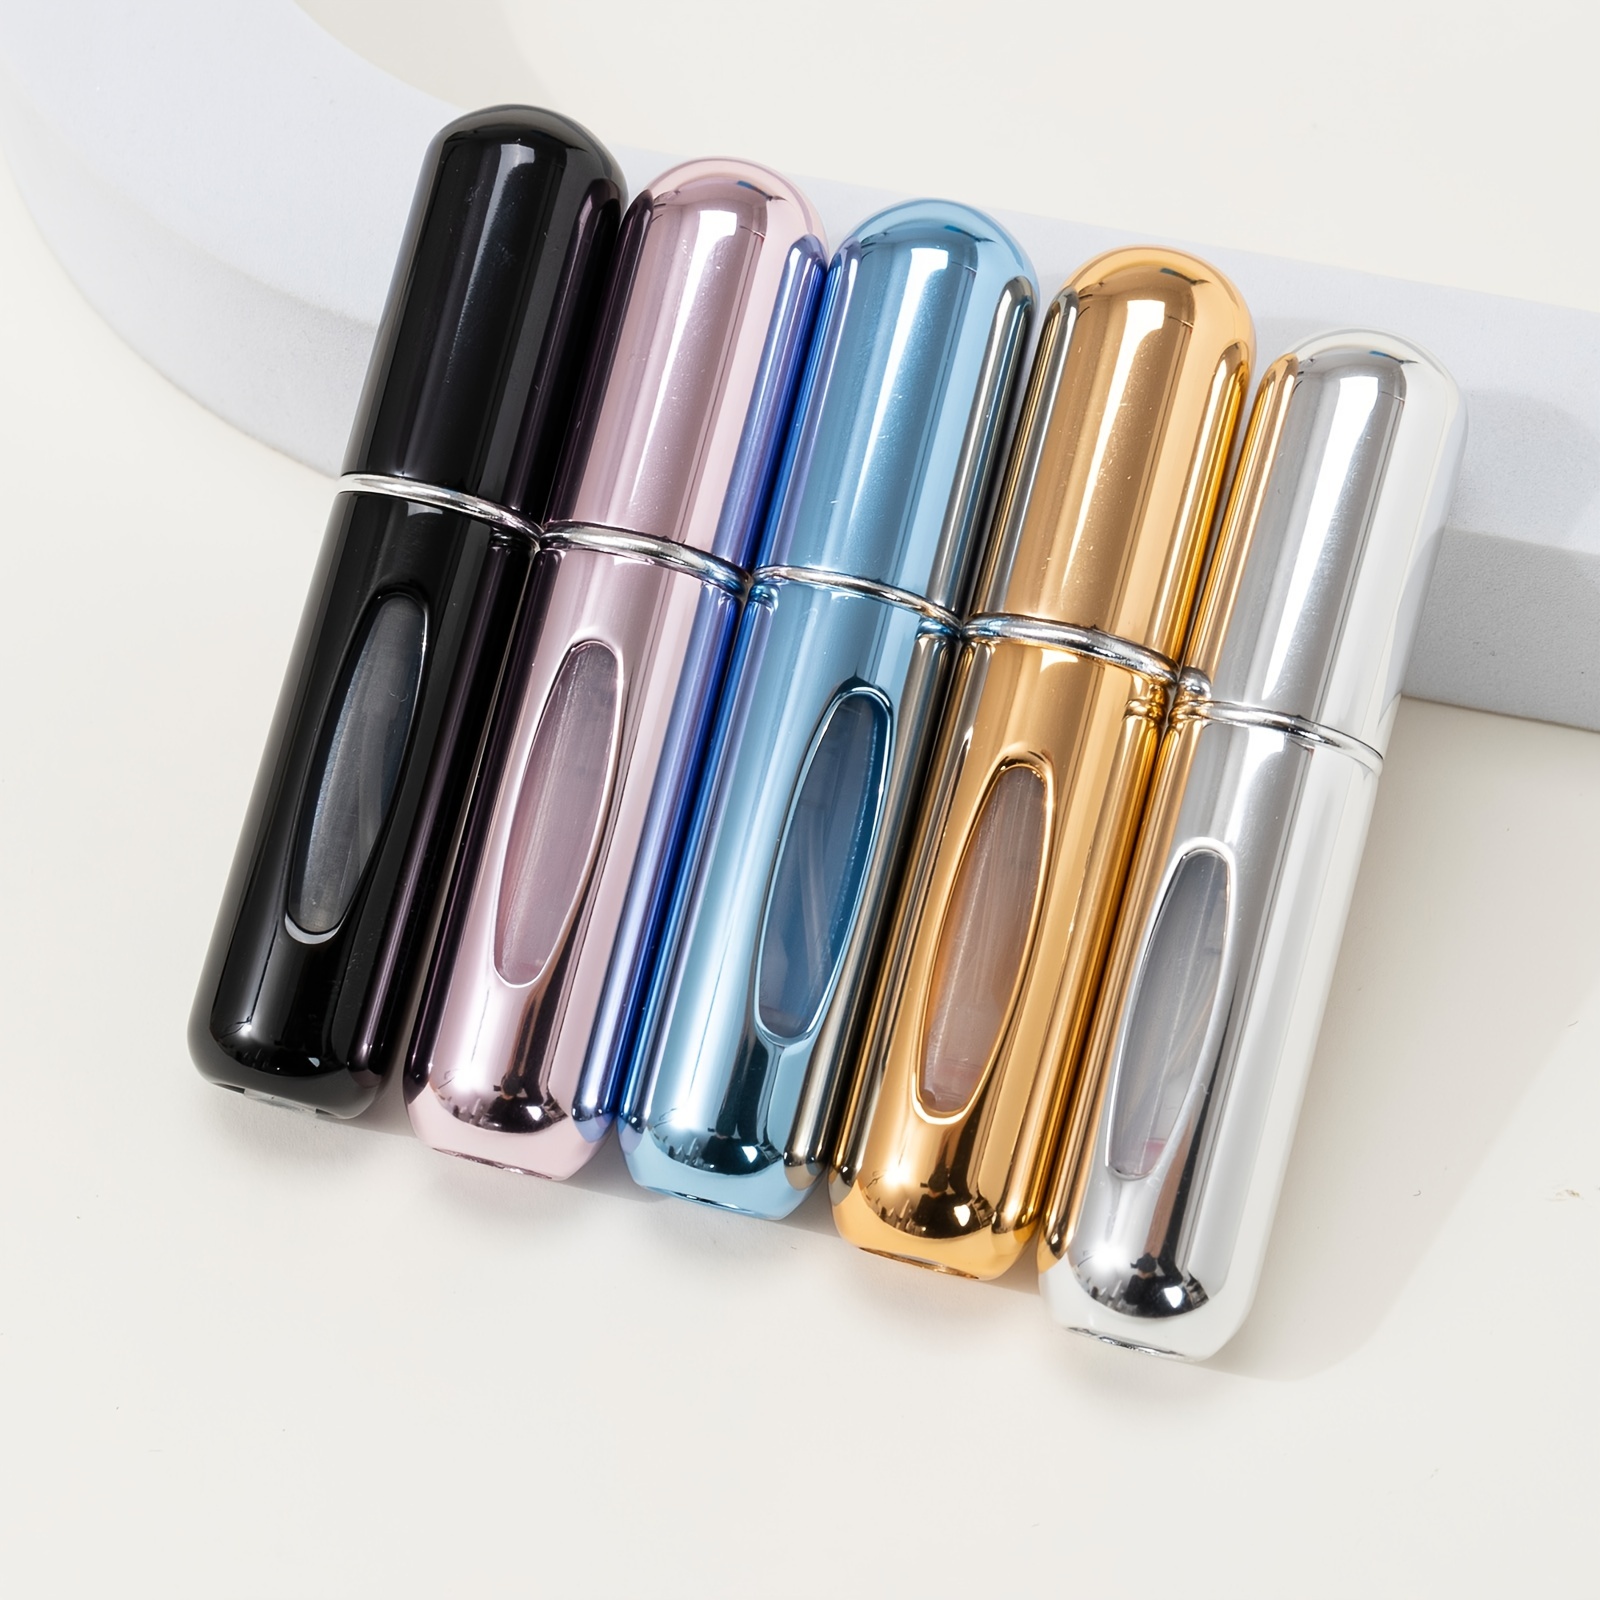  4 PCS Portable Mini Refillable Perfume Atomizer Bottle, Travel  Size Spray Bottles Scent Pump Case With Cosmetic Bag, Pocket Perfume  Sprayer For Traveling & Outgoing(Pack Of 5ml, Random Color) : Beauty